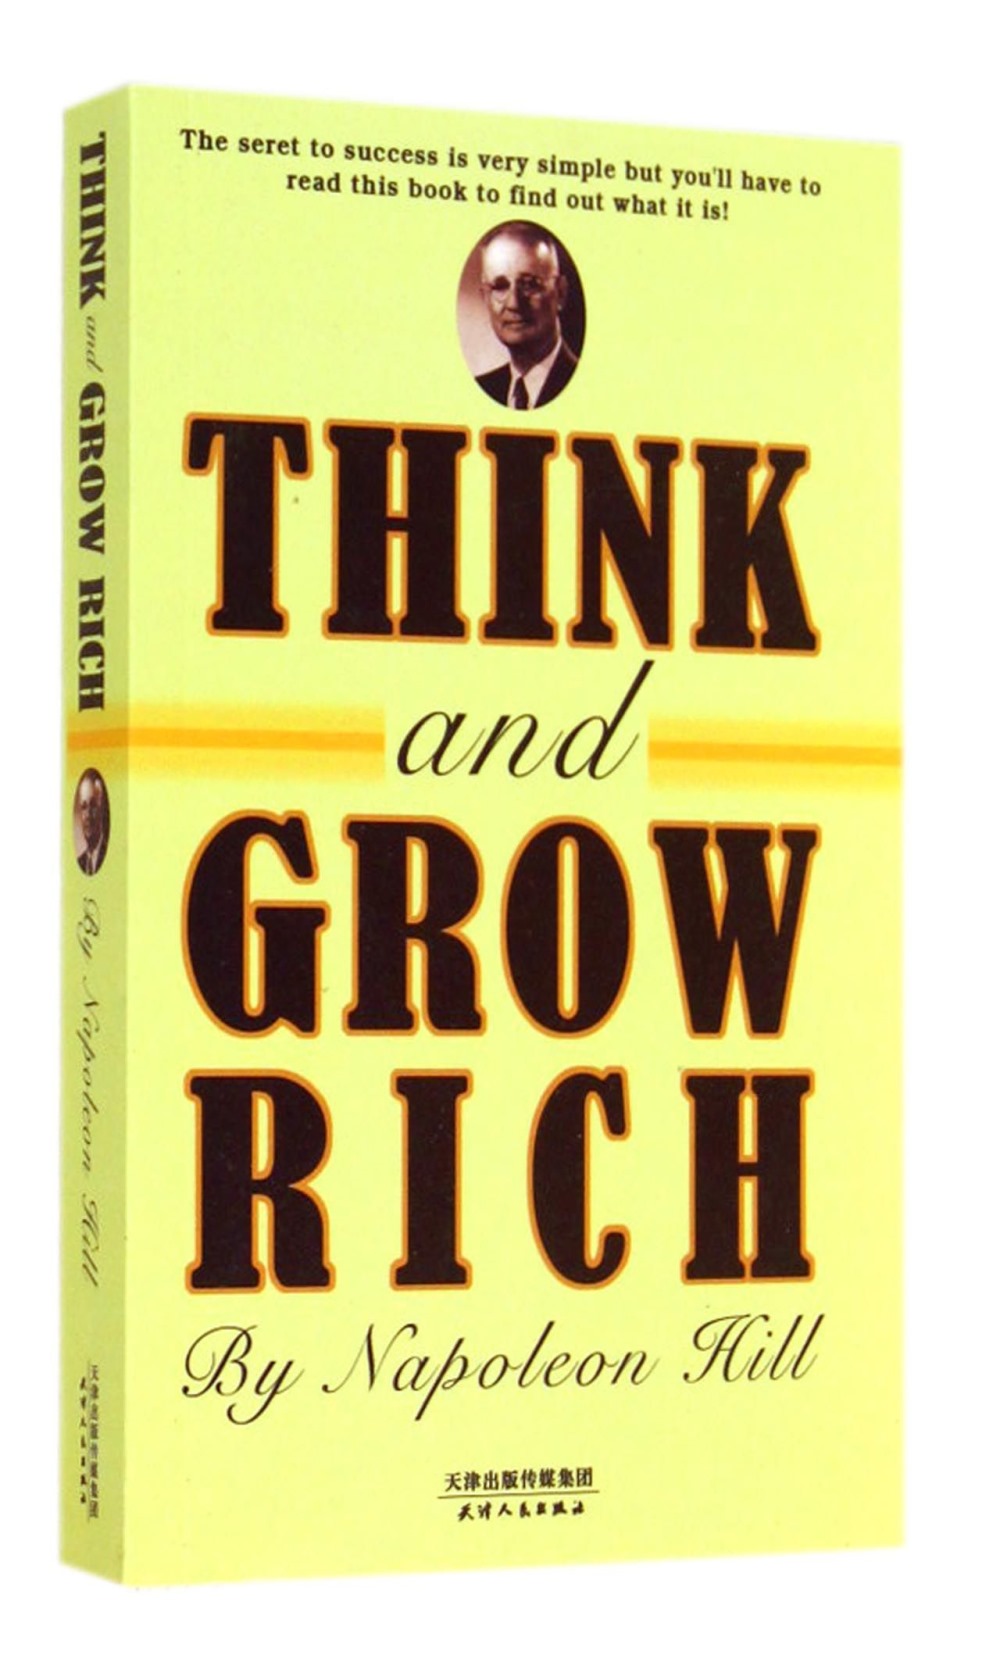 THINK and GROW RICH=思考致富（英文朗讀版）